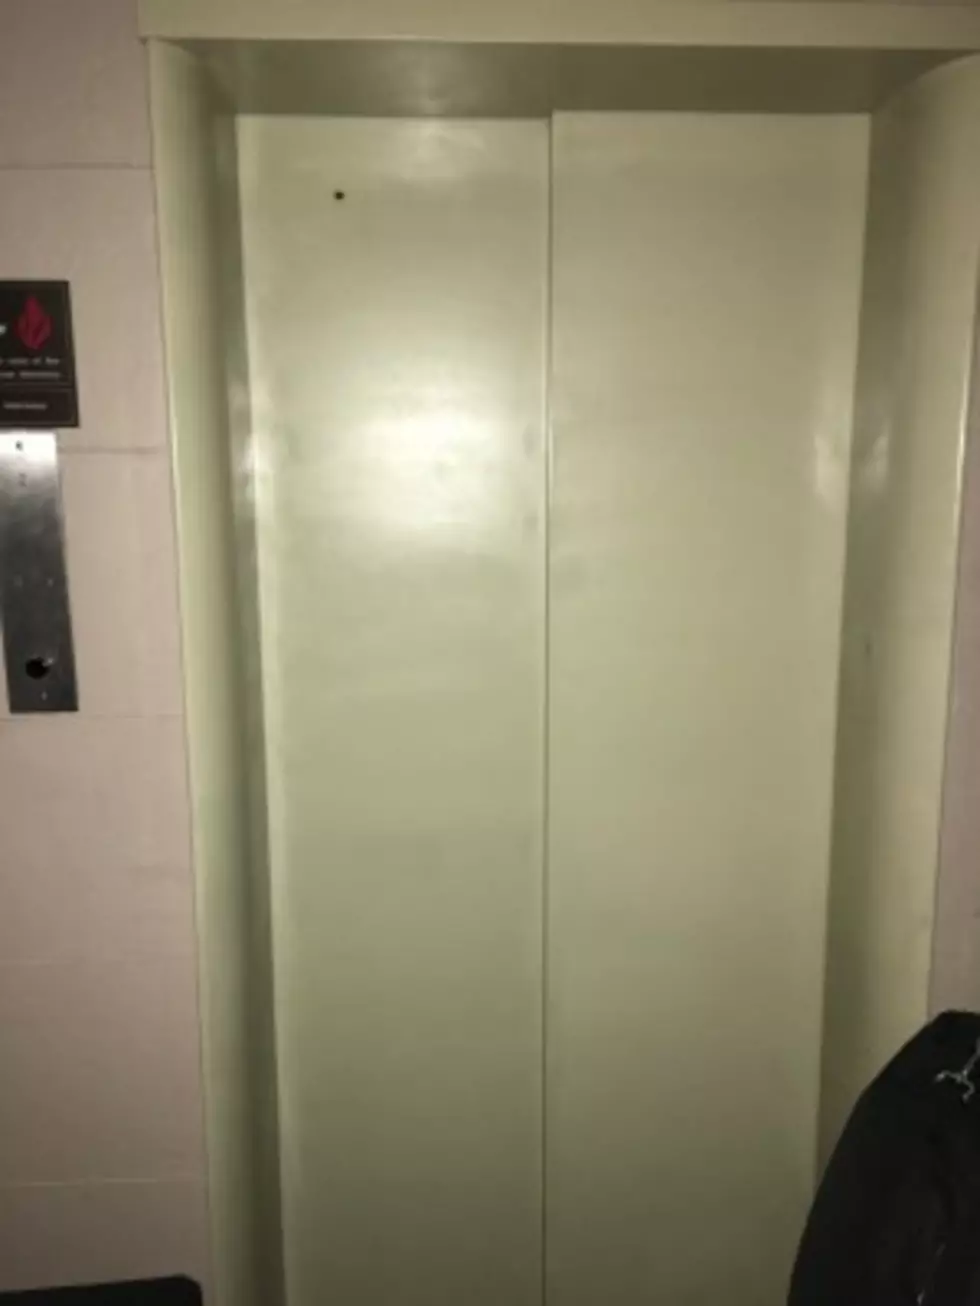 My Trapped in an Elevator Experience